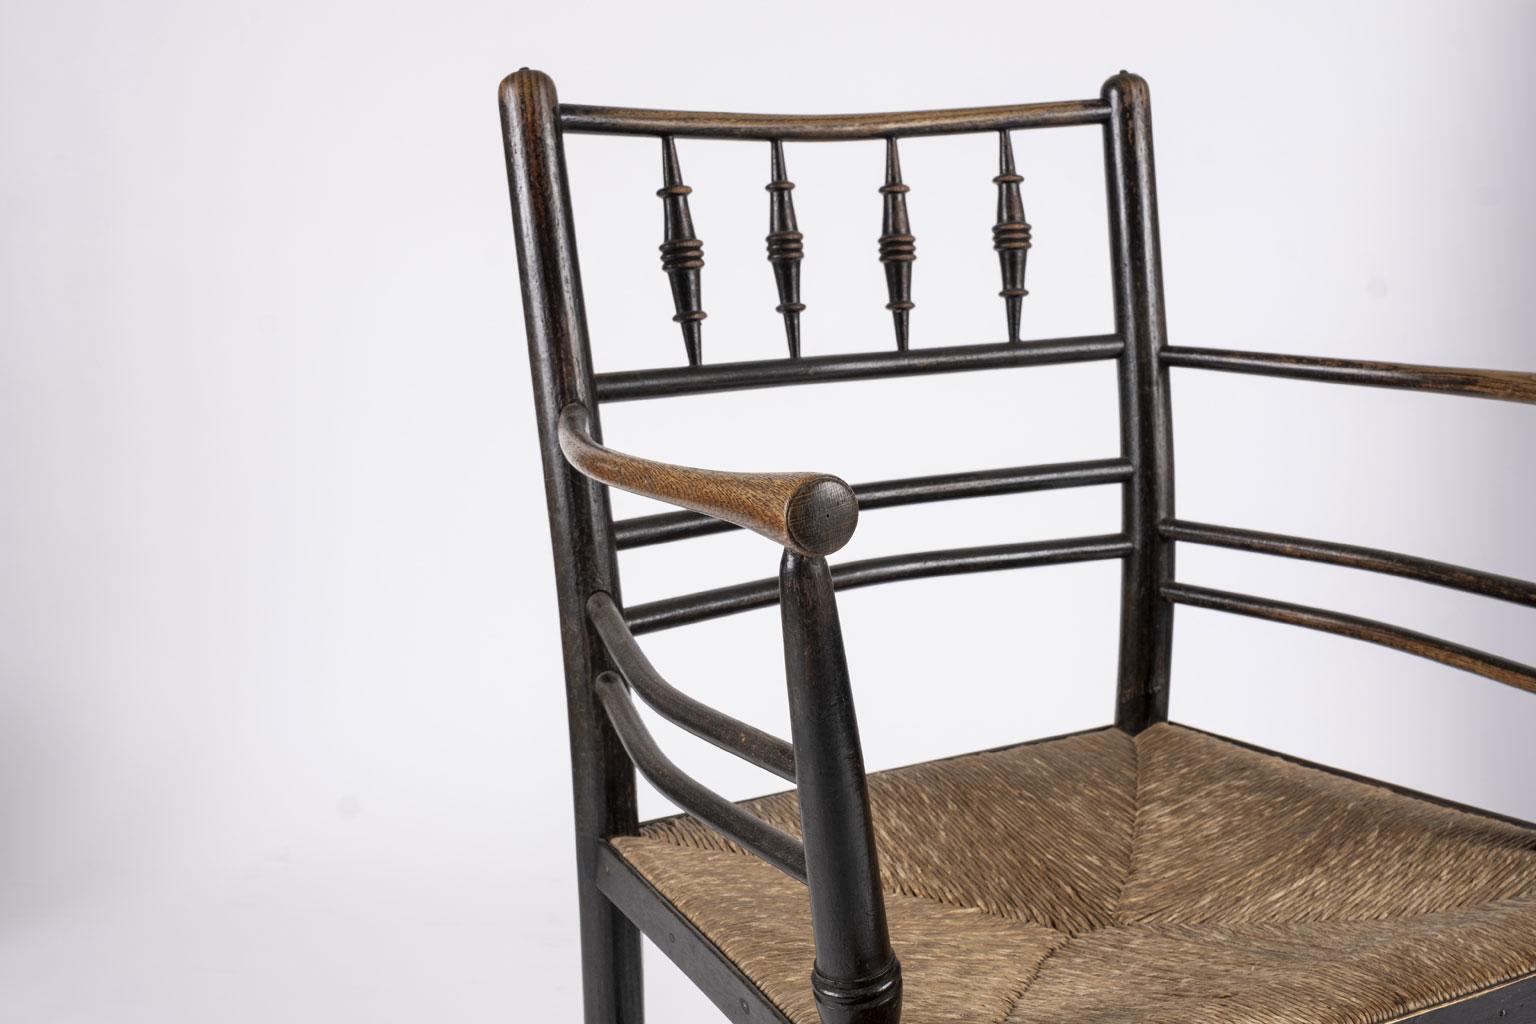 Pair of William Morris ebonized Sussex armchairs in excellent condition with original finish and early or original rush seats. These chairs (made by Morris & Co circa 1865-1885) are named after a type of country chair found in Sussex, which inspired